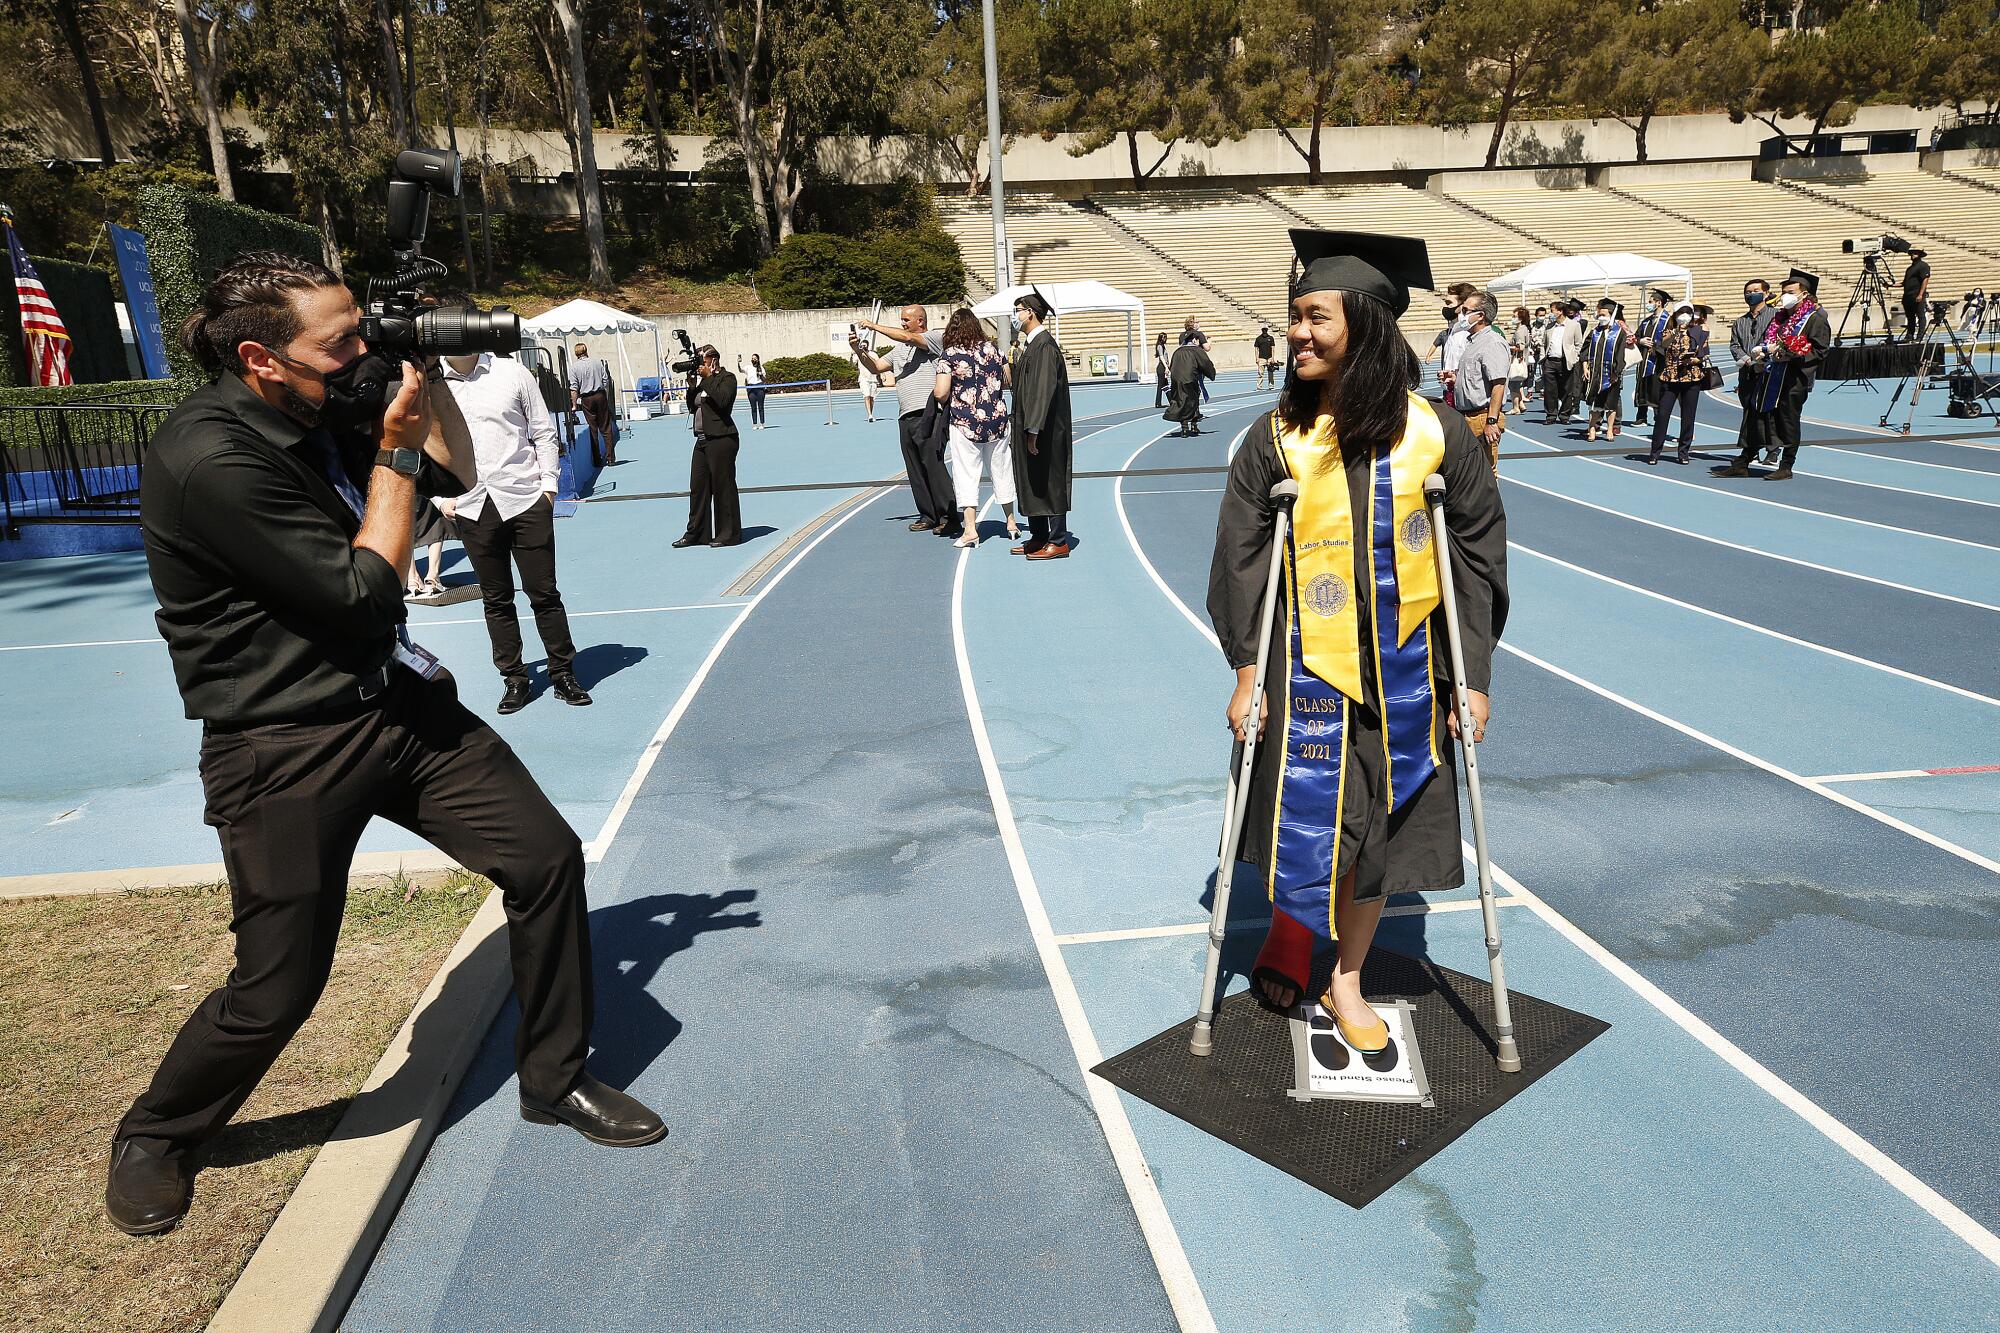 Sophia Bautista, 22, graduating with a degree in Political Science and Labor Studies is on crutches 